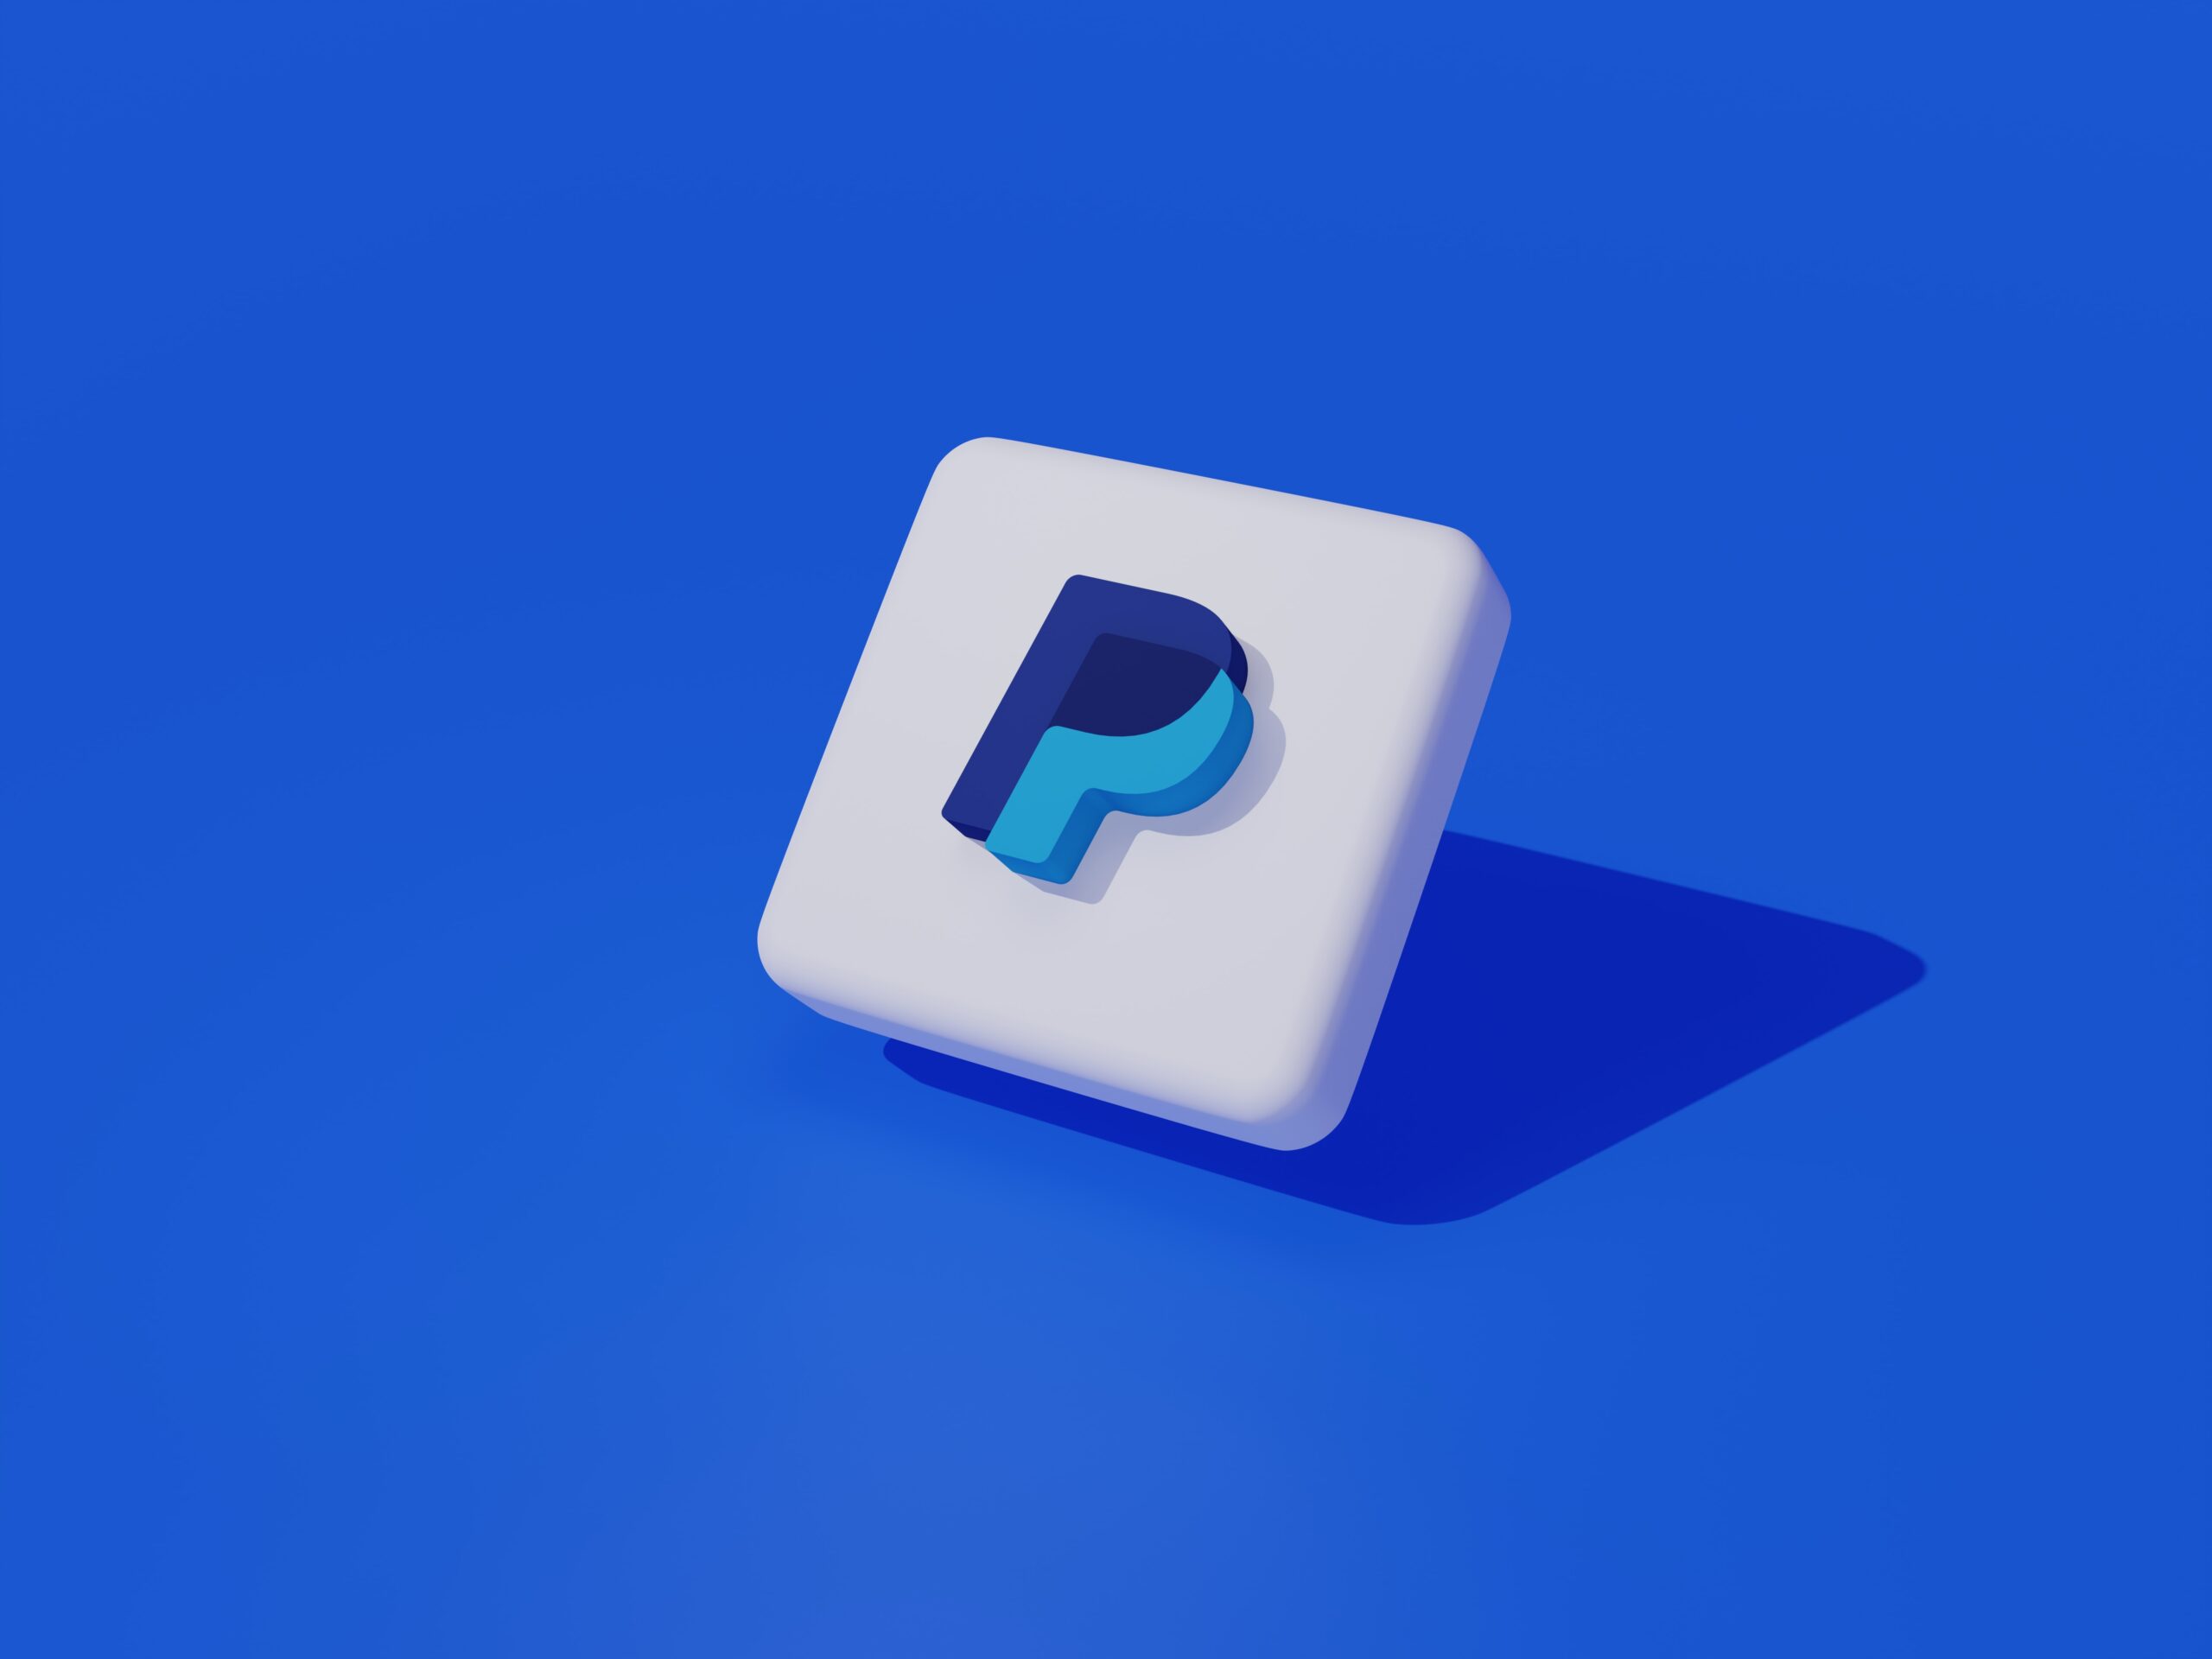 PayPal Makes Waves in the Crypto World with Launch of its Own Stablecoin